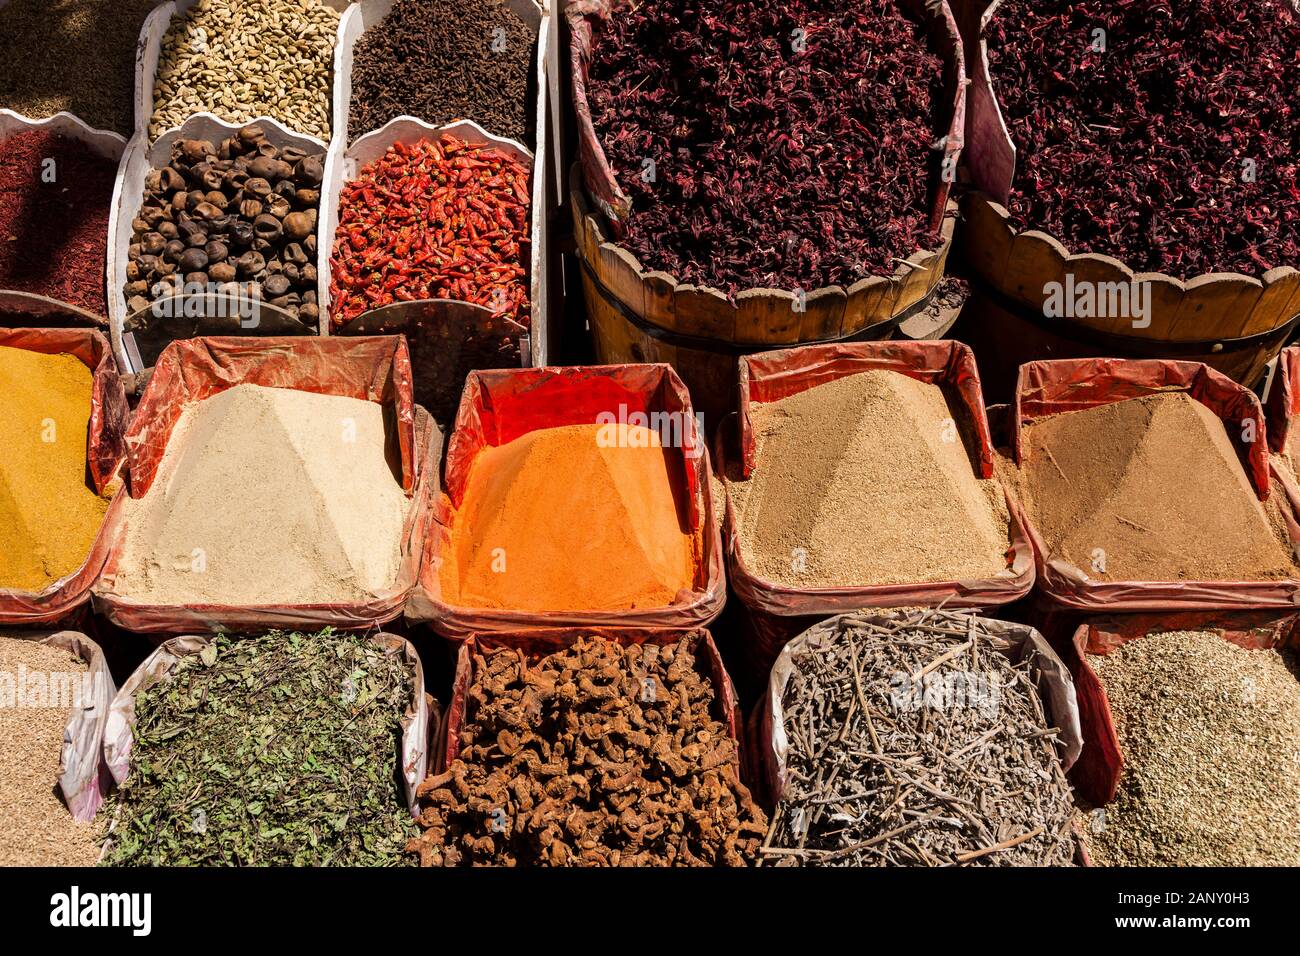 Spice and dry foods shop, Main street of  suq, also bazaar, city market, city center, Aswan, Egypt, North Africa, Africa Stock Photo